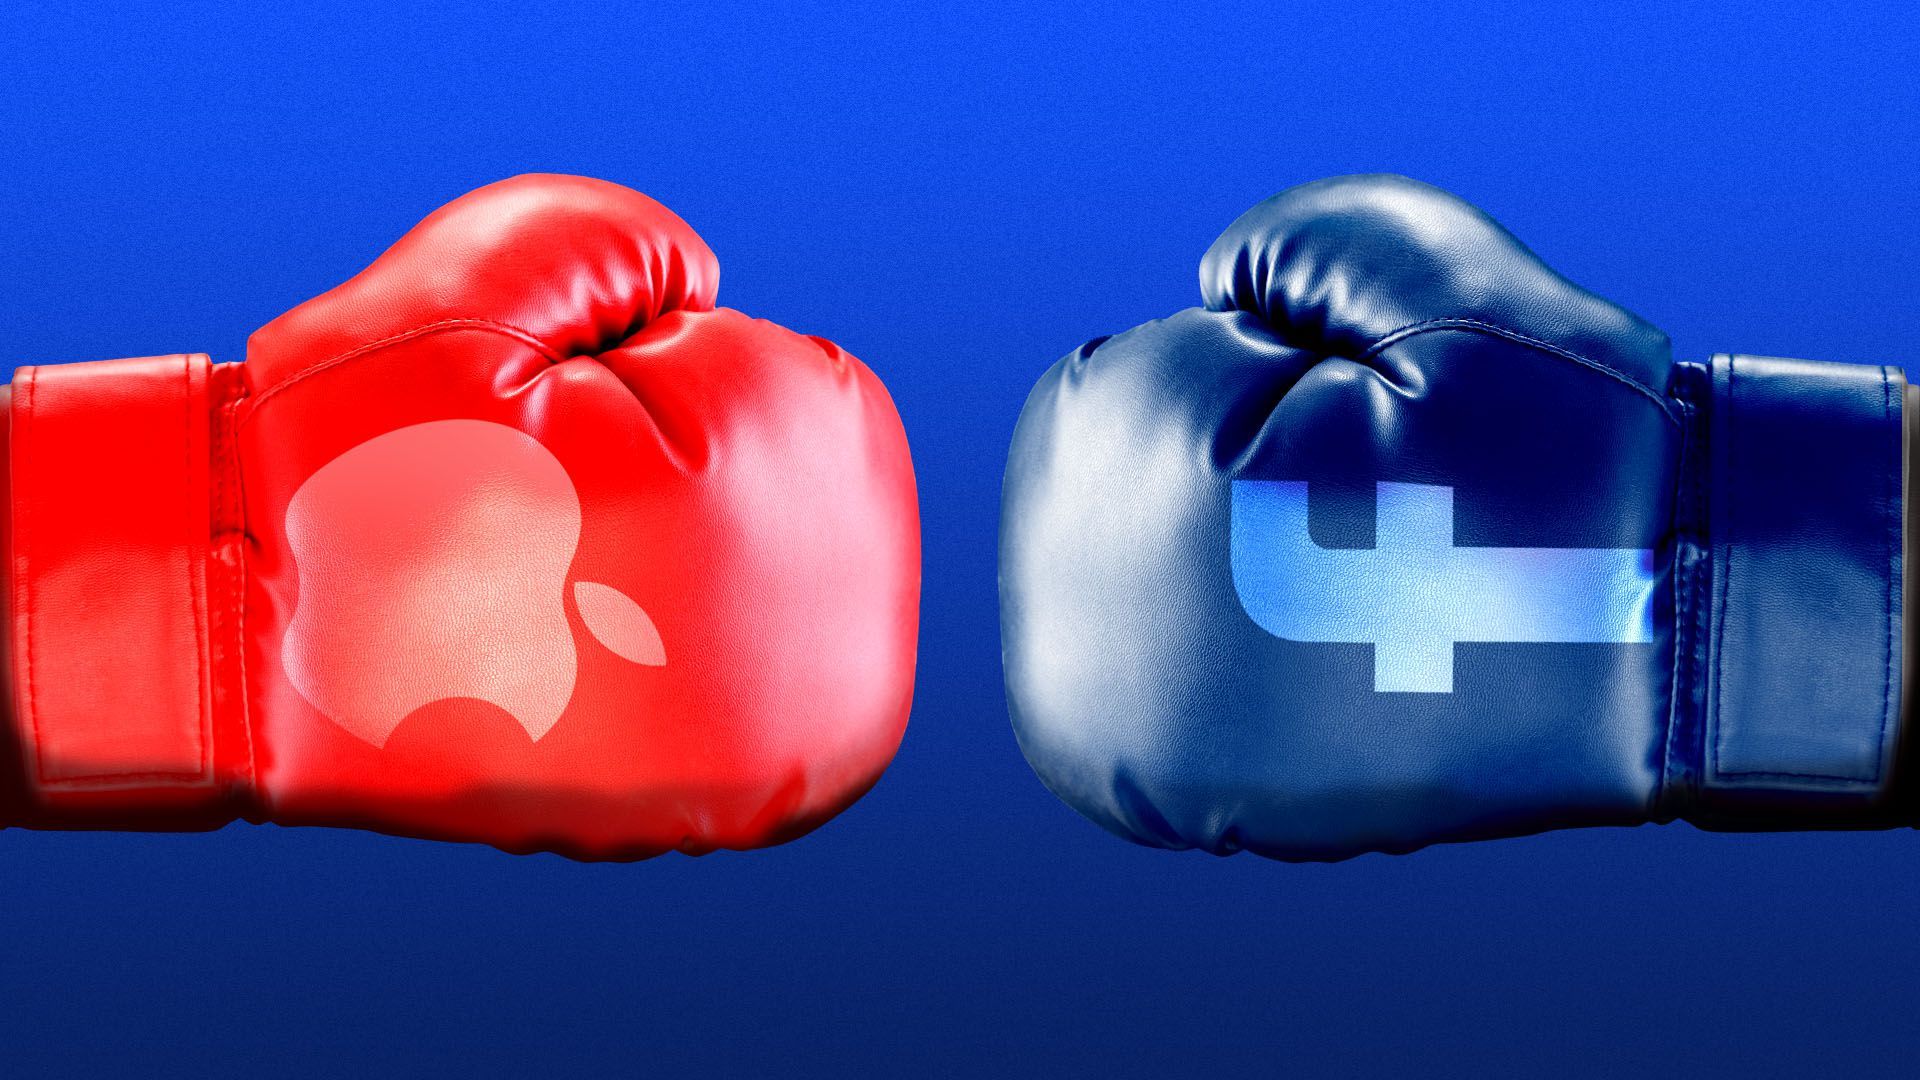 Illustration of two different colored boxing gloves with the facebook and apple logos on them